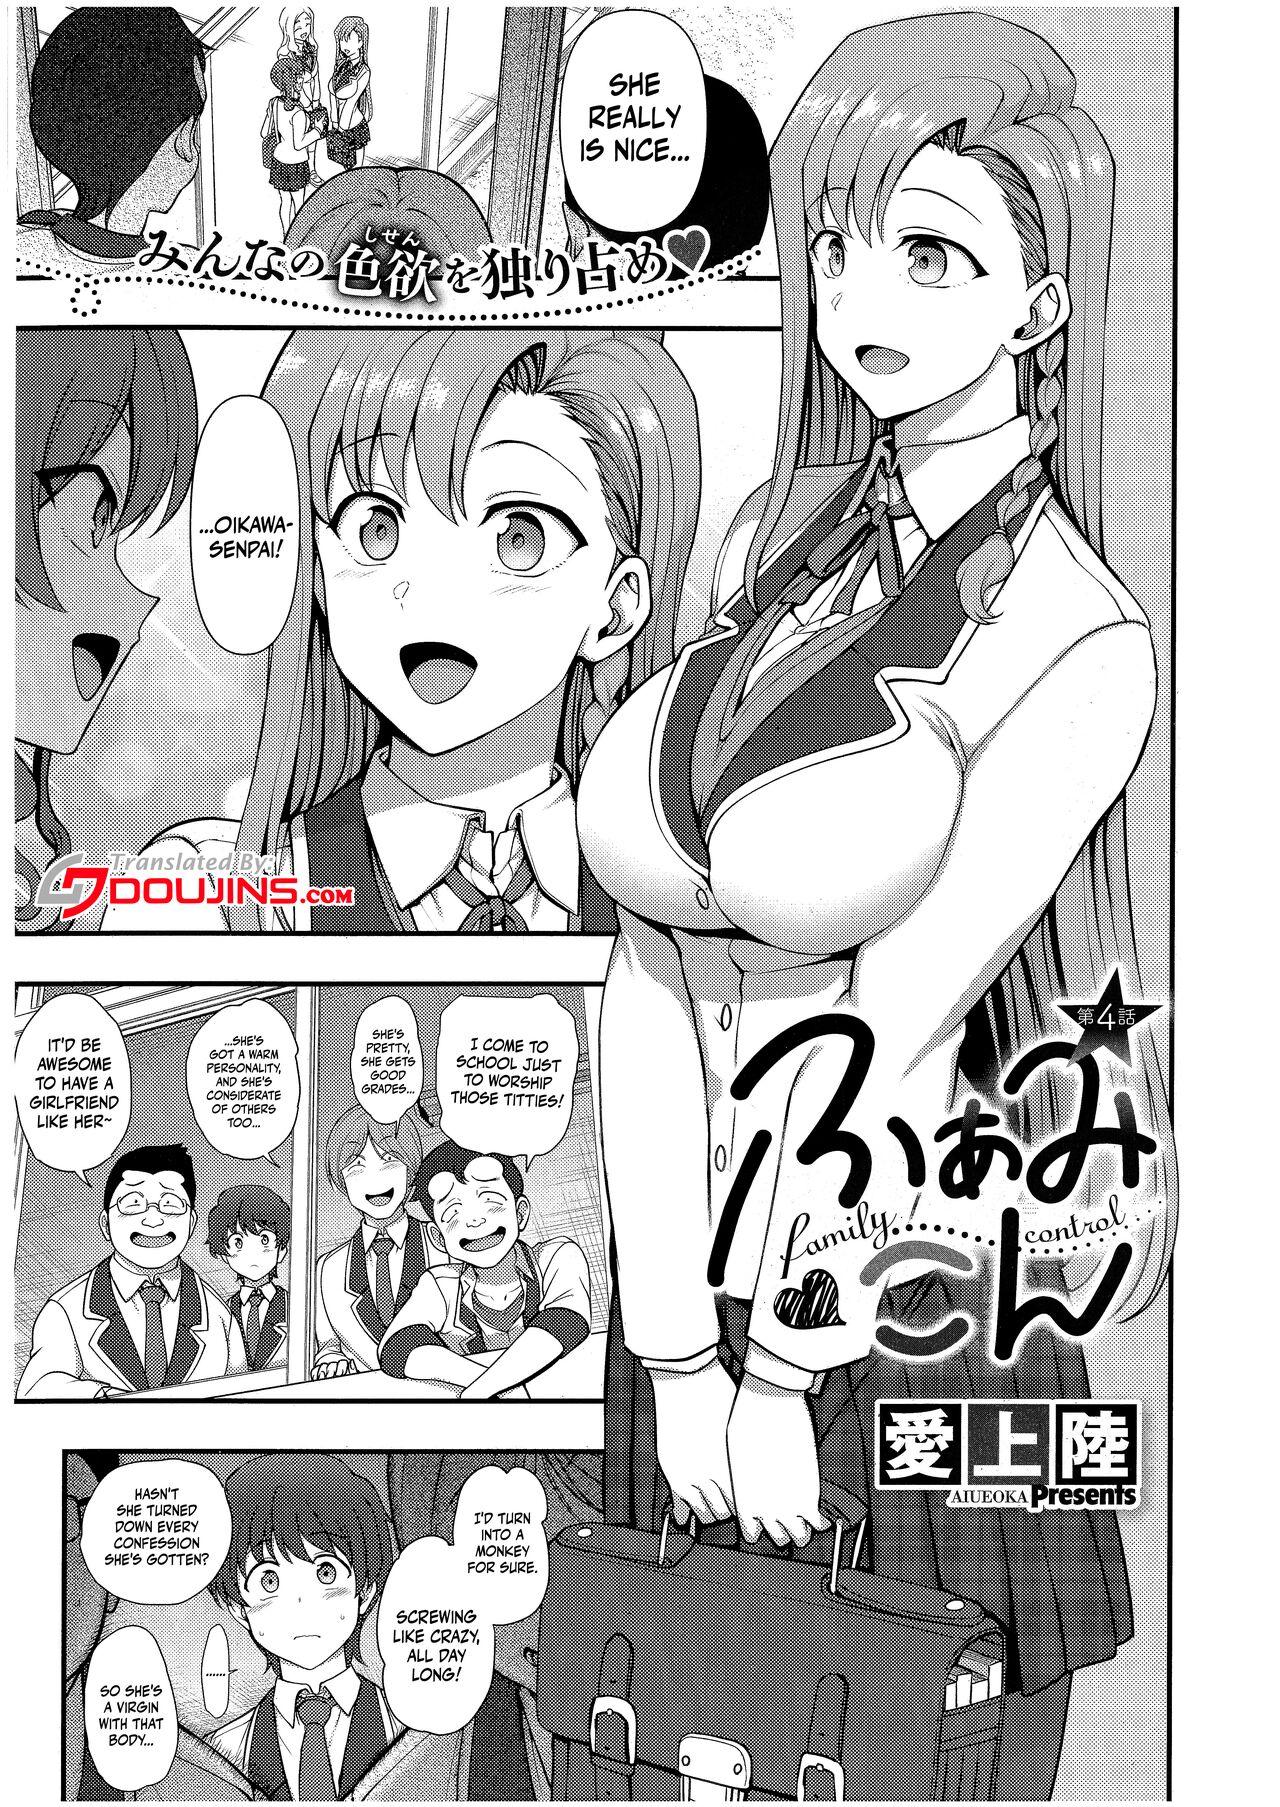 Oral Porn FamiCon - Family Control Ch. 4 Ejaculations - Page 1